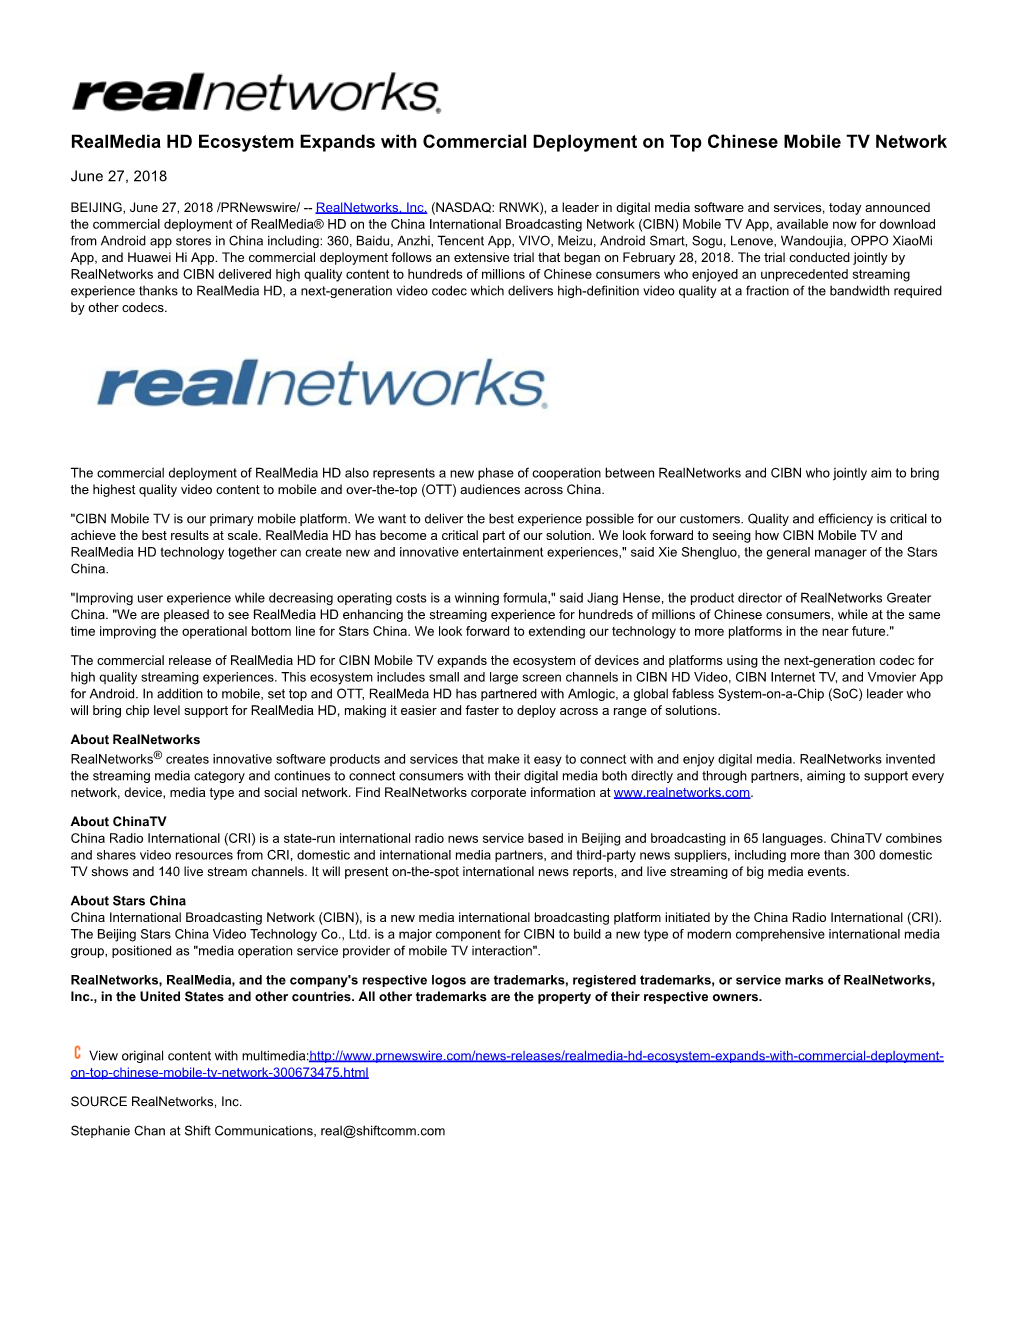 Realmedia HD Ecosystem Expands with Commercial Deployment on Top Chinese Mobile TV Network